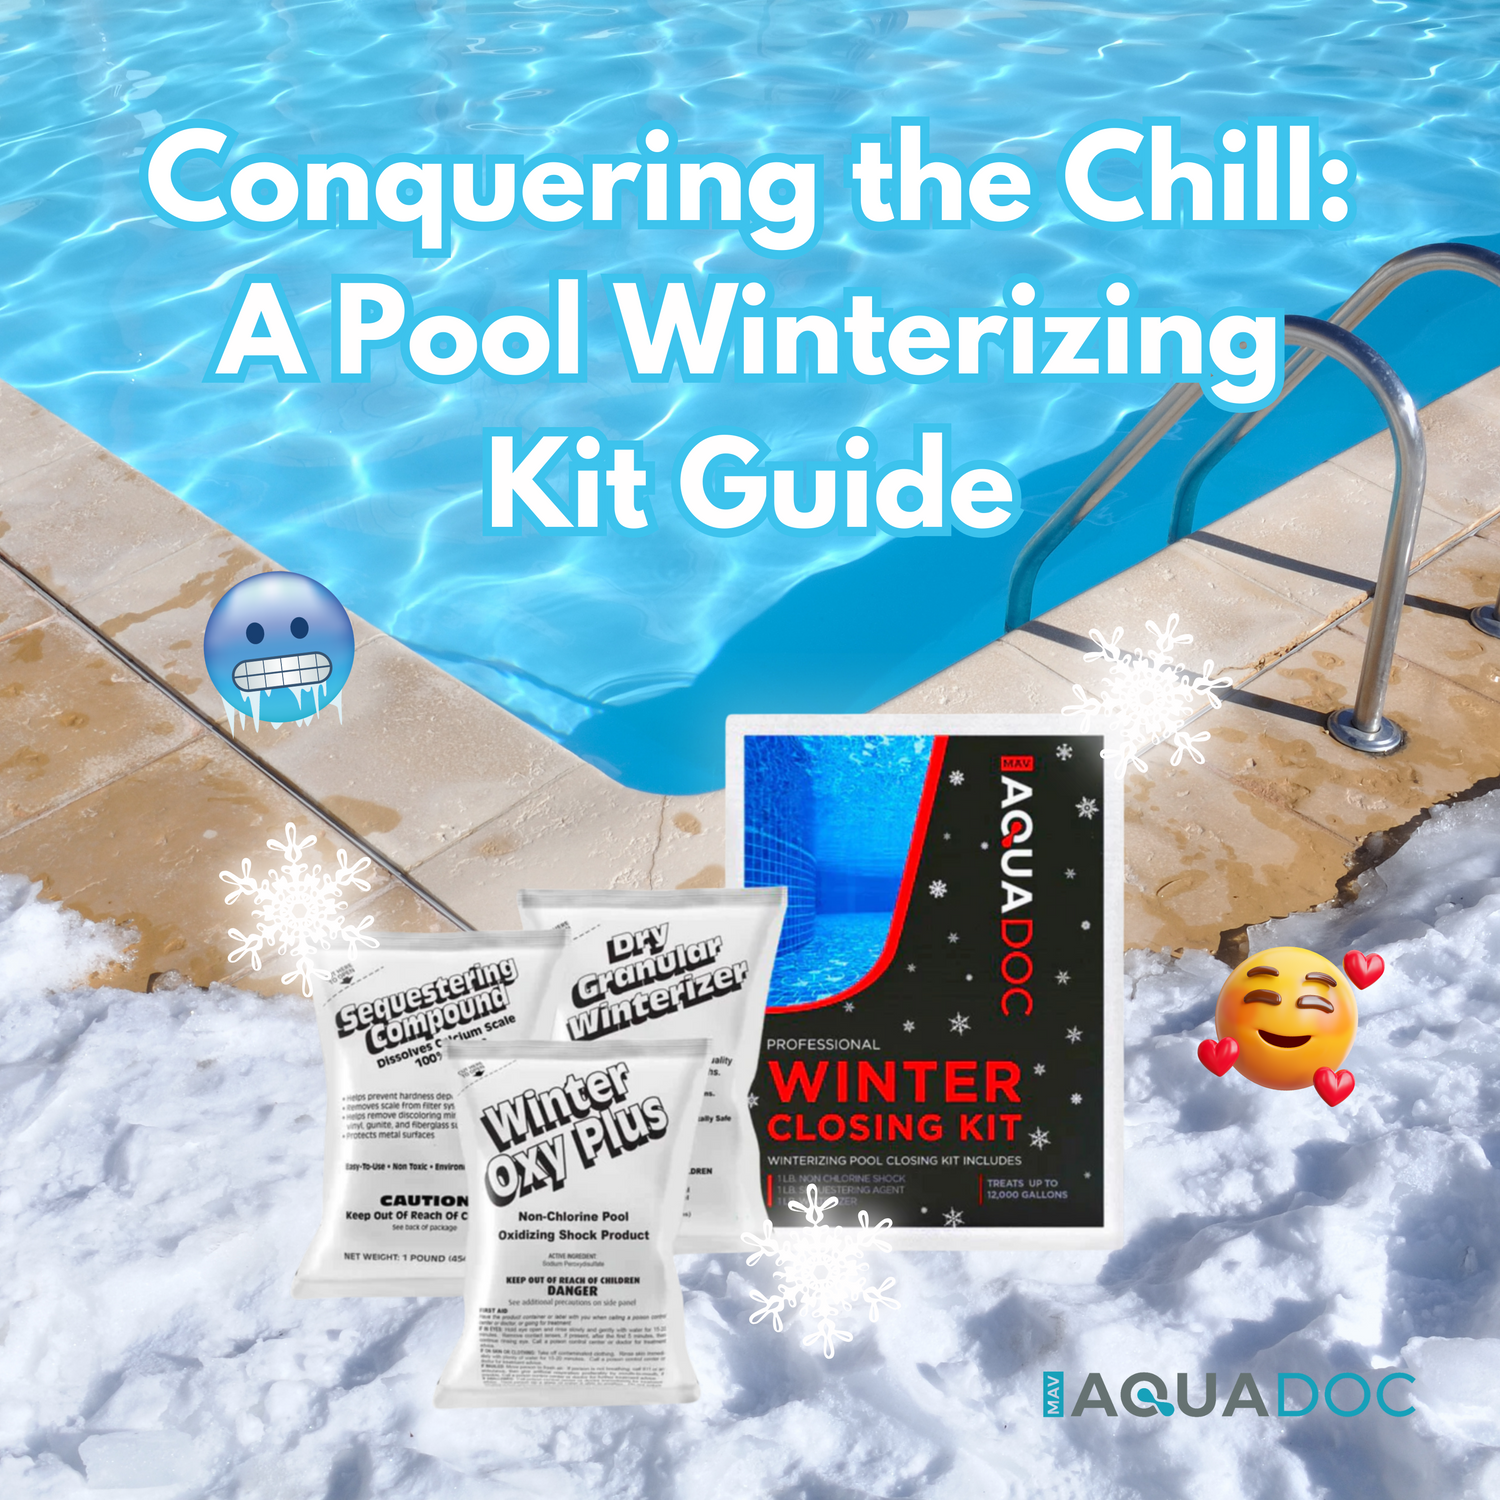 Pool winterizing kit guide with components and steps to prepare your pool for winter.